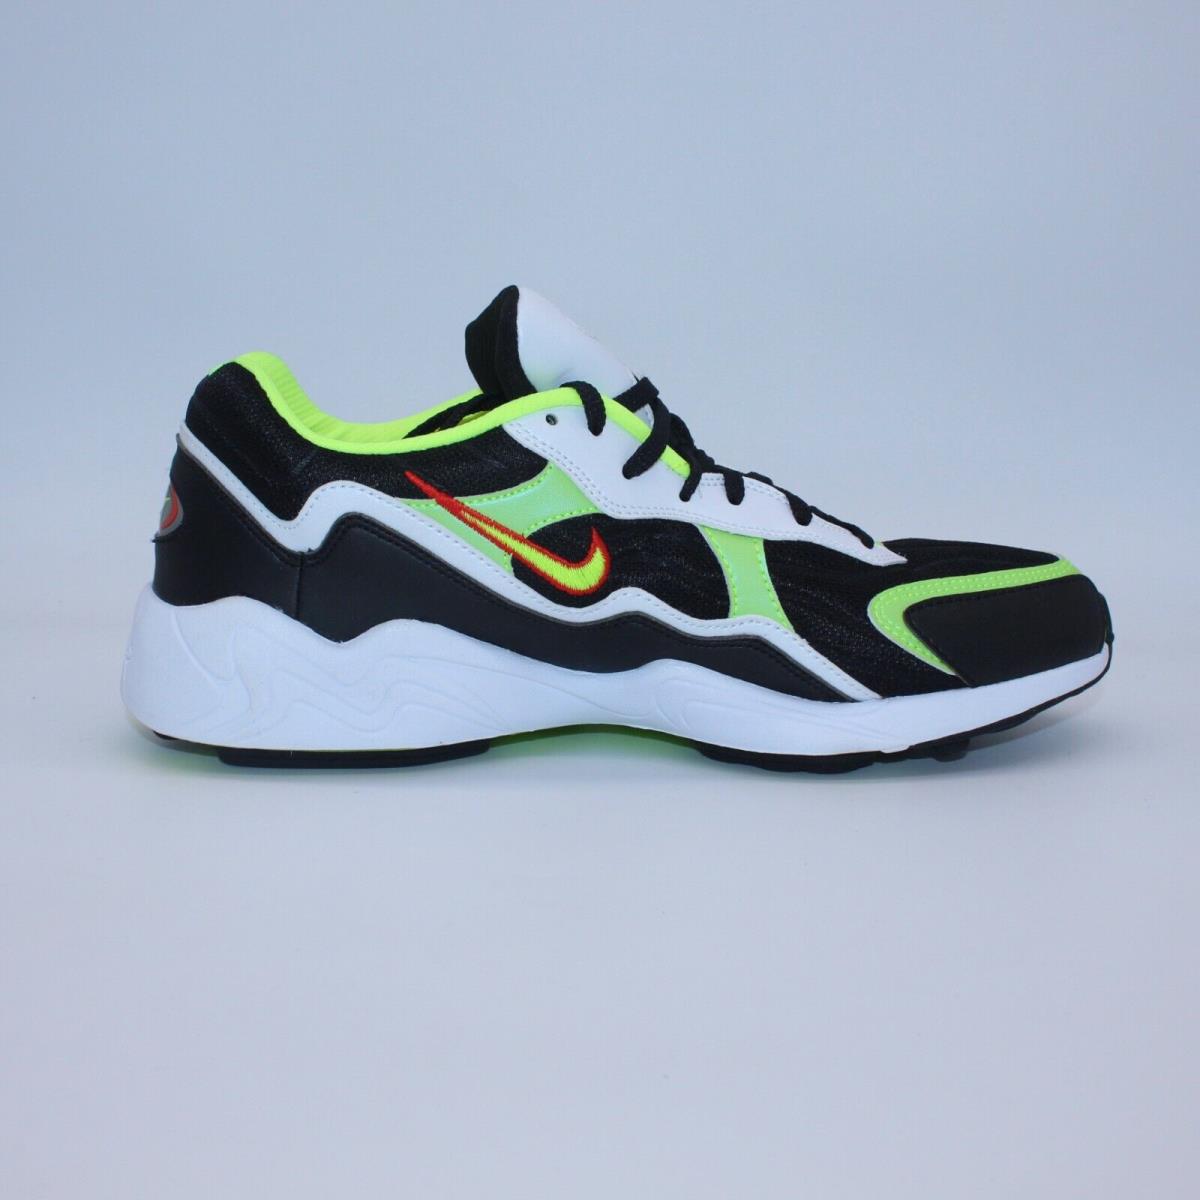 Nike shoes Air Zoom Alpha - White, black, volt, habanero red 2